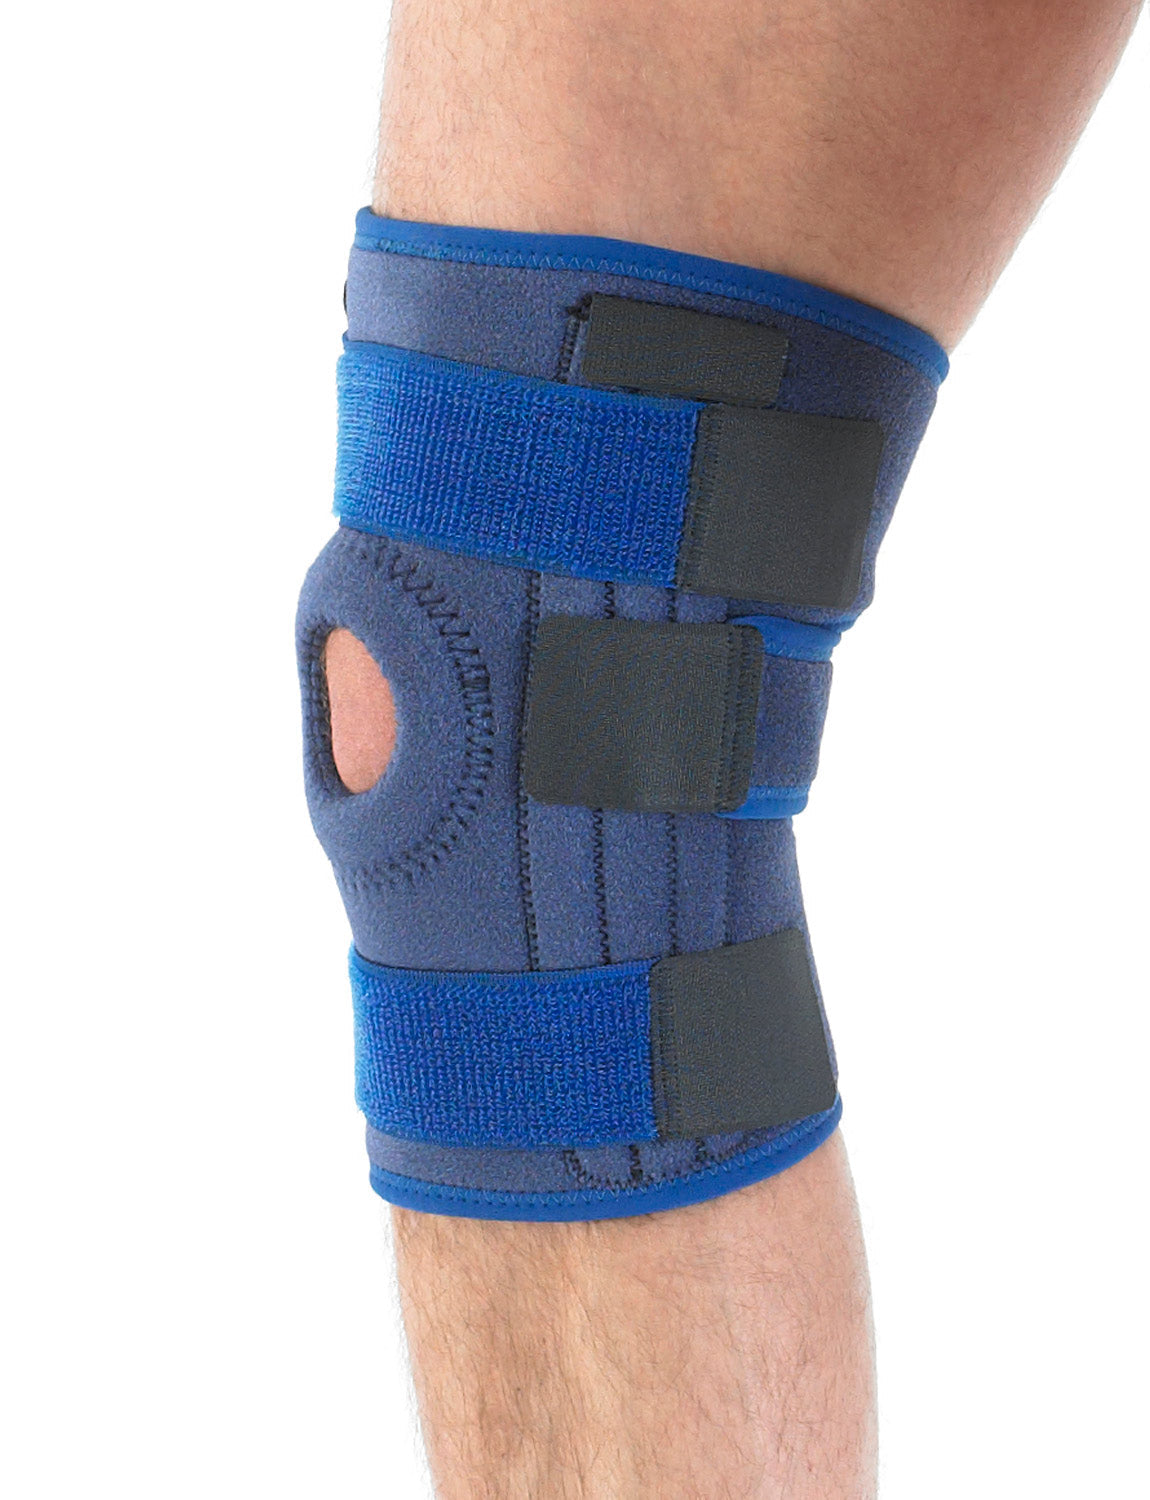 Neo G Stabilized Open Knee Support – Neo G USA